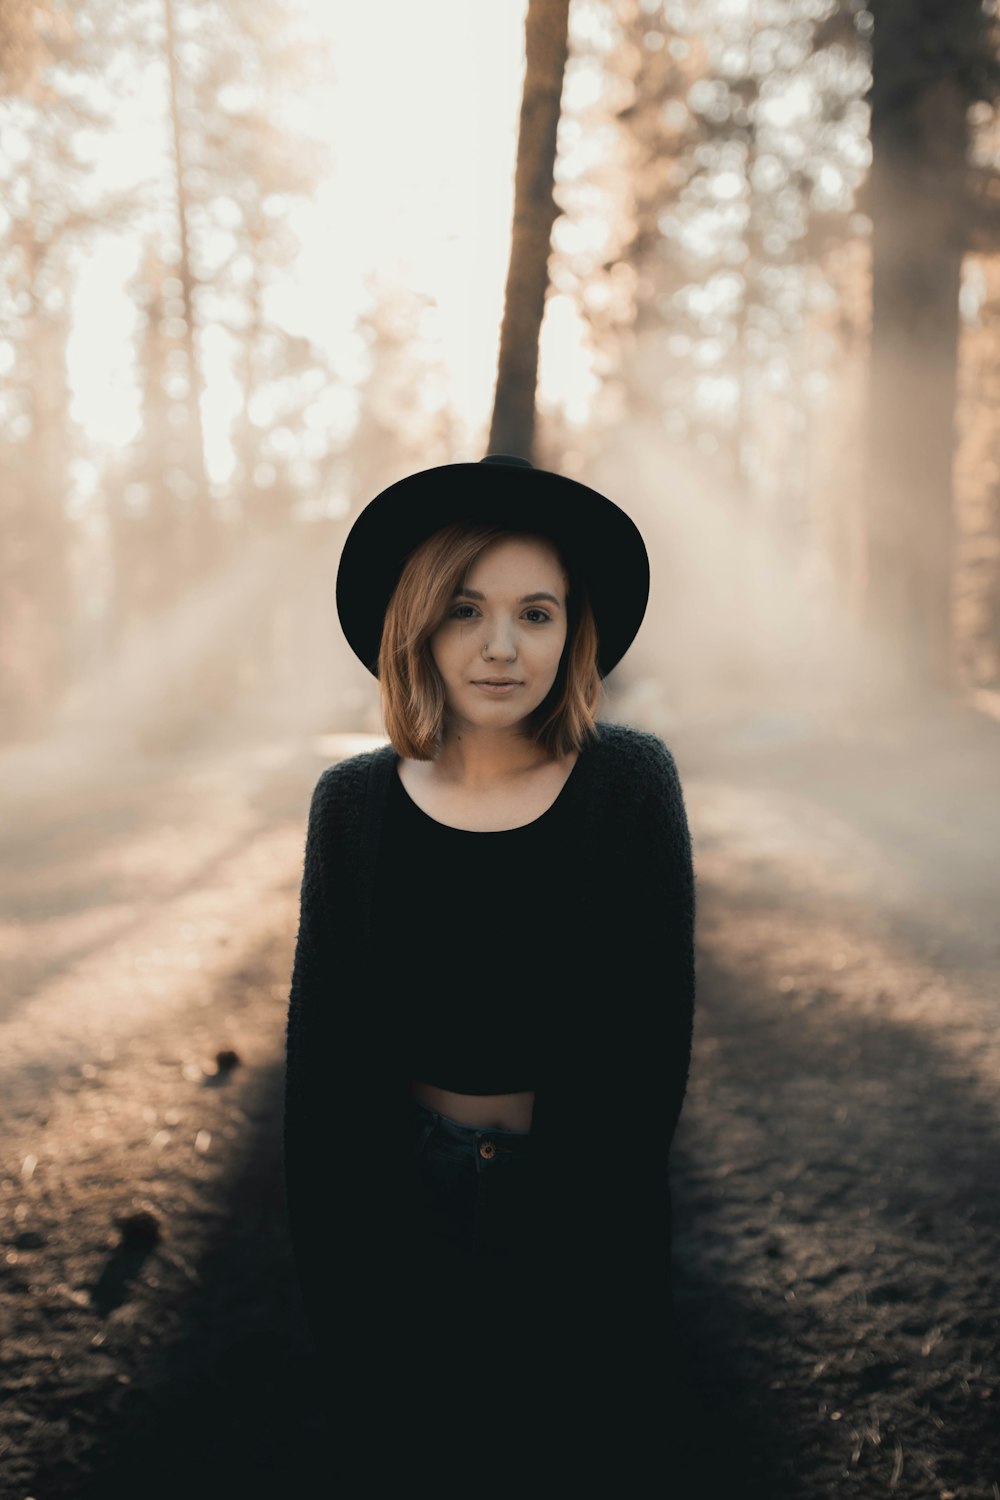 woman in black long sleeve shirt and black hat standing near brown tree during daytime